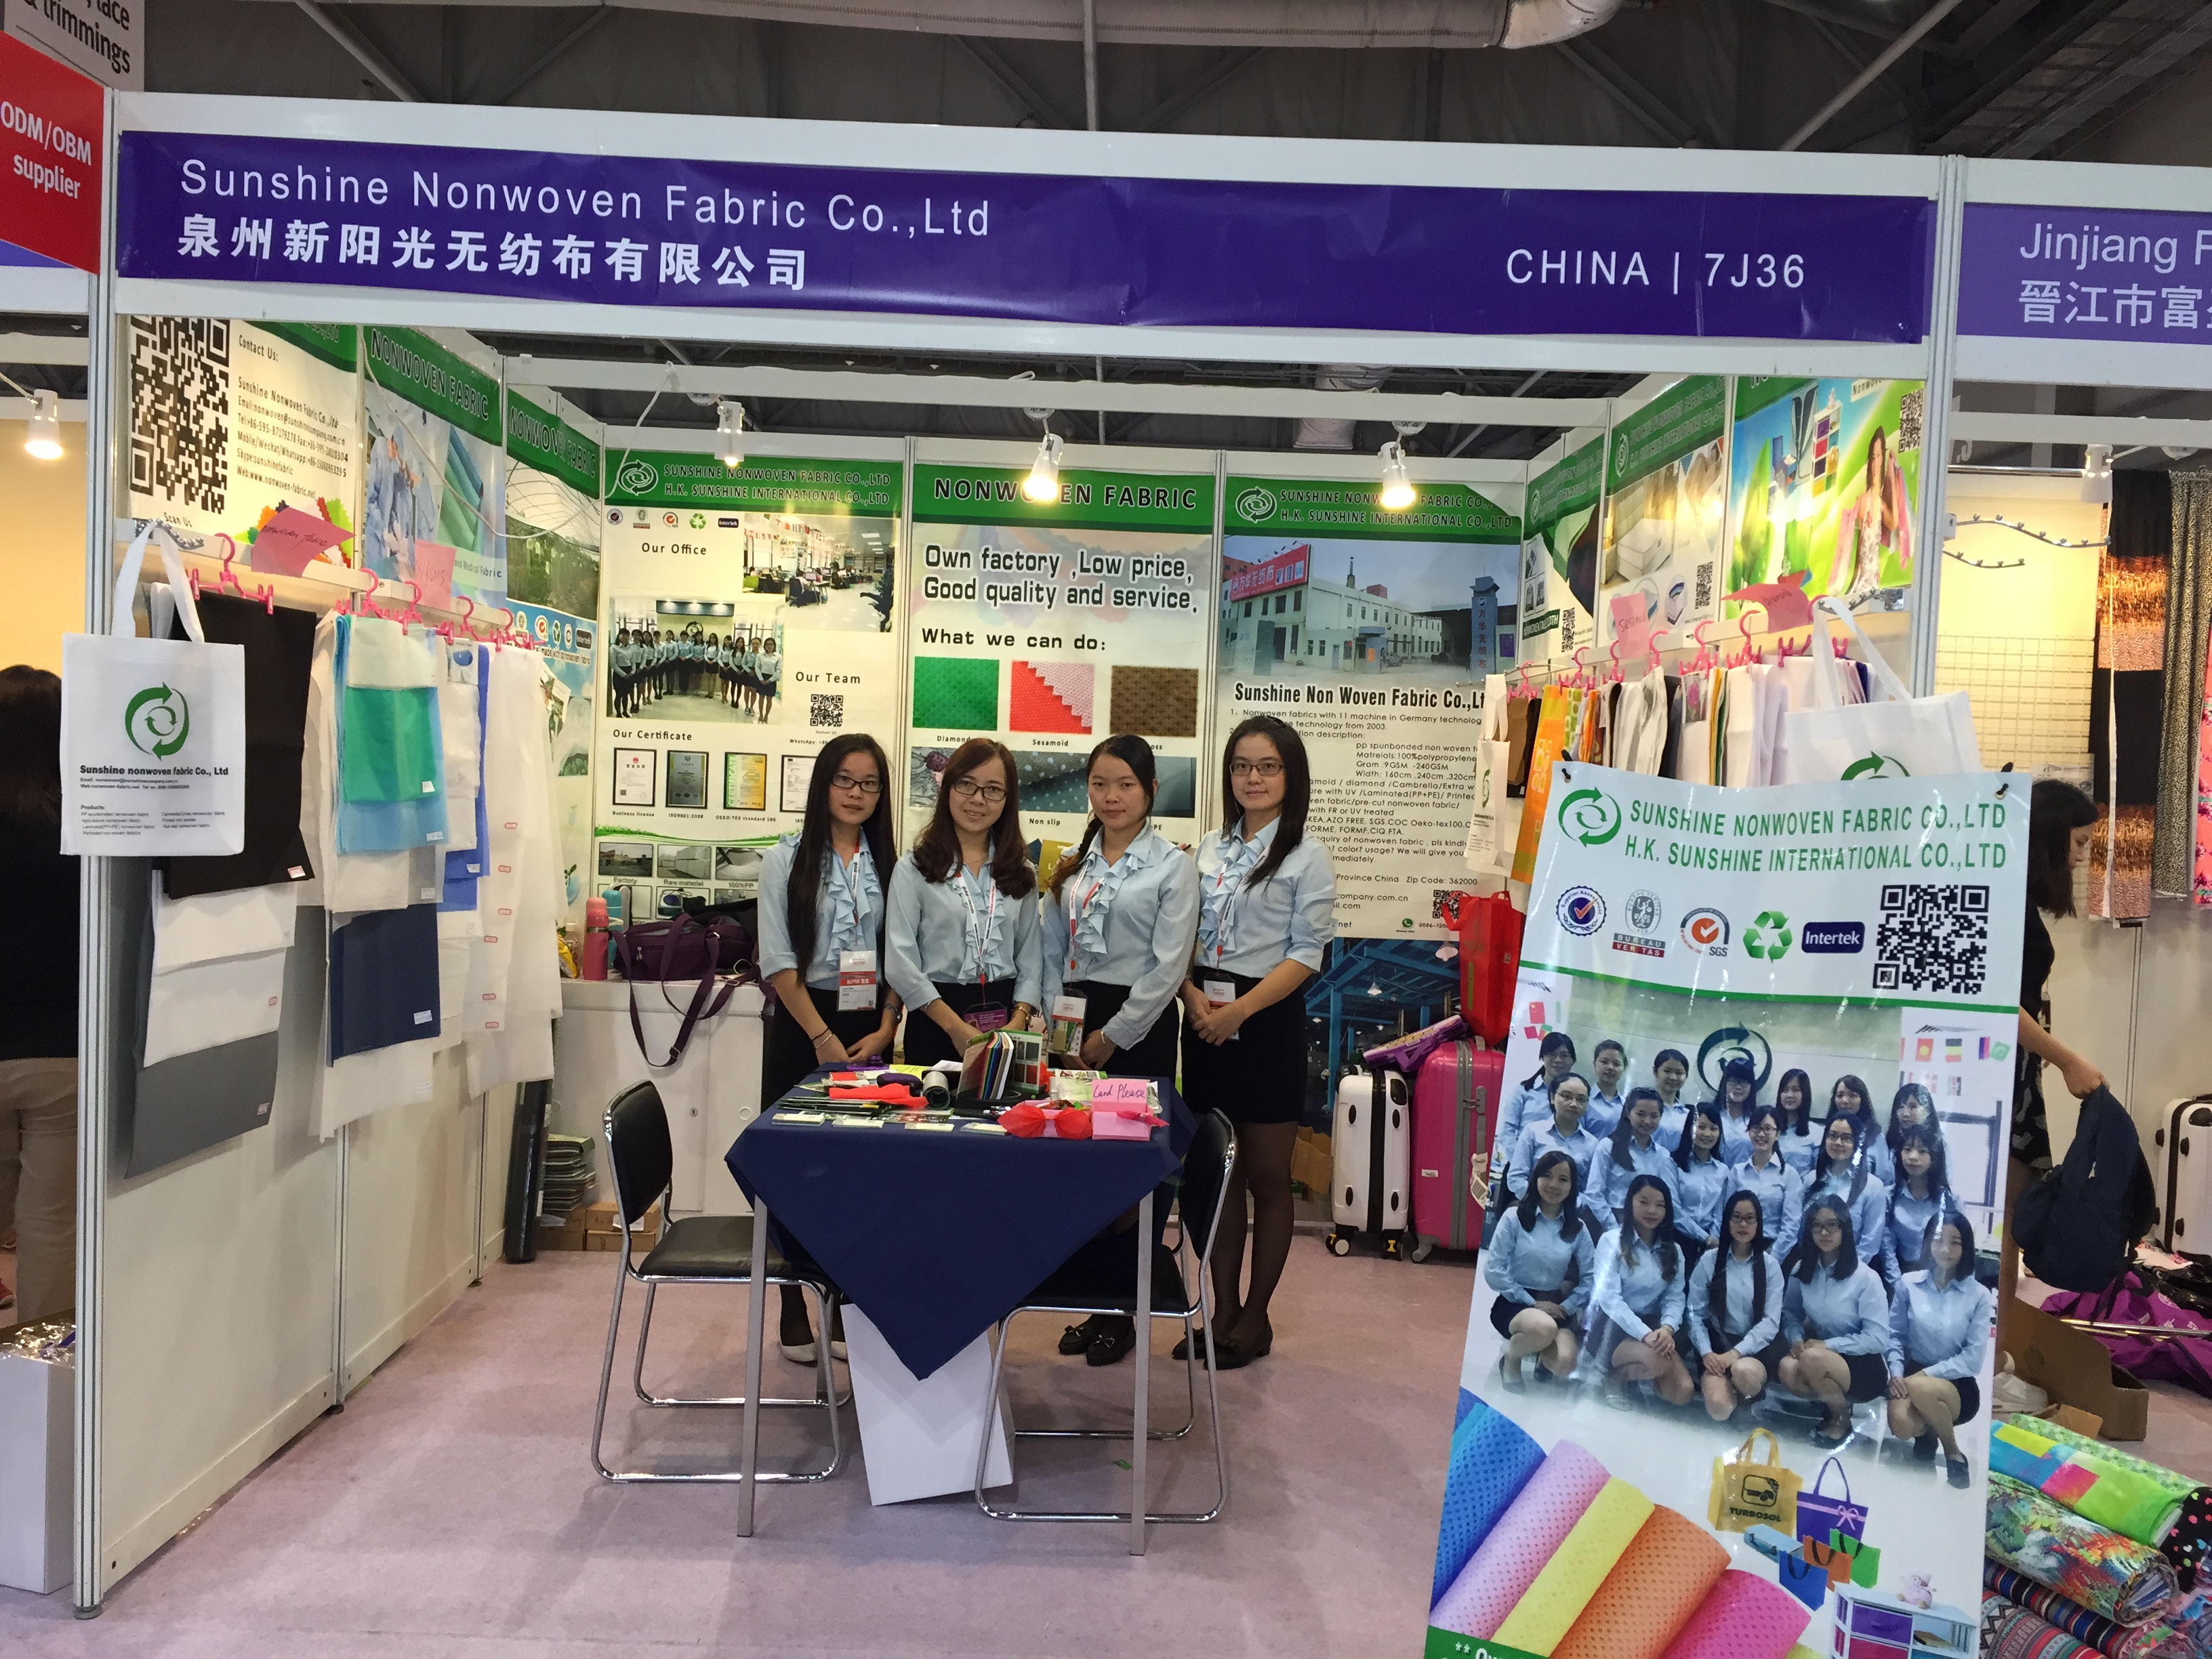 Sunshine attended The Asia World Expo HK2015